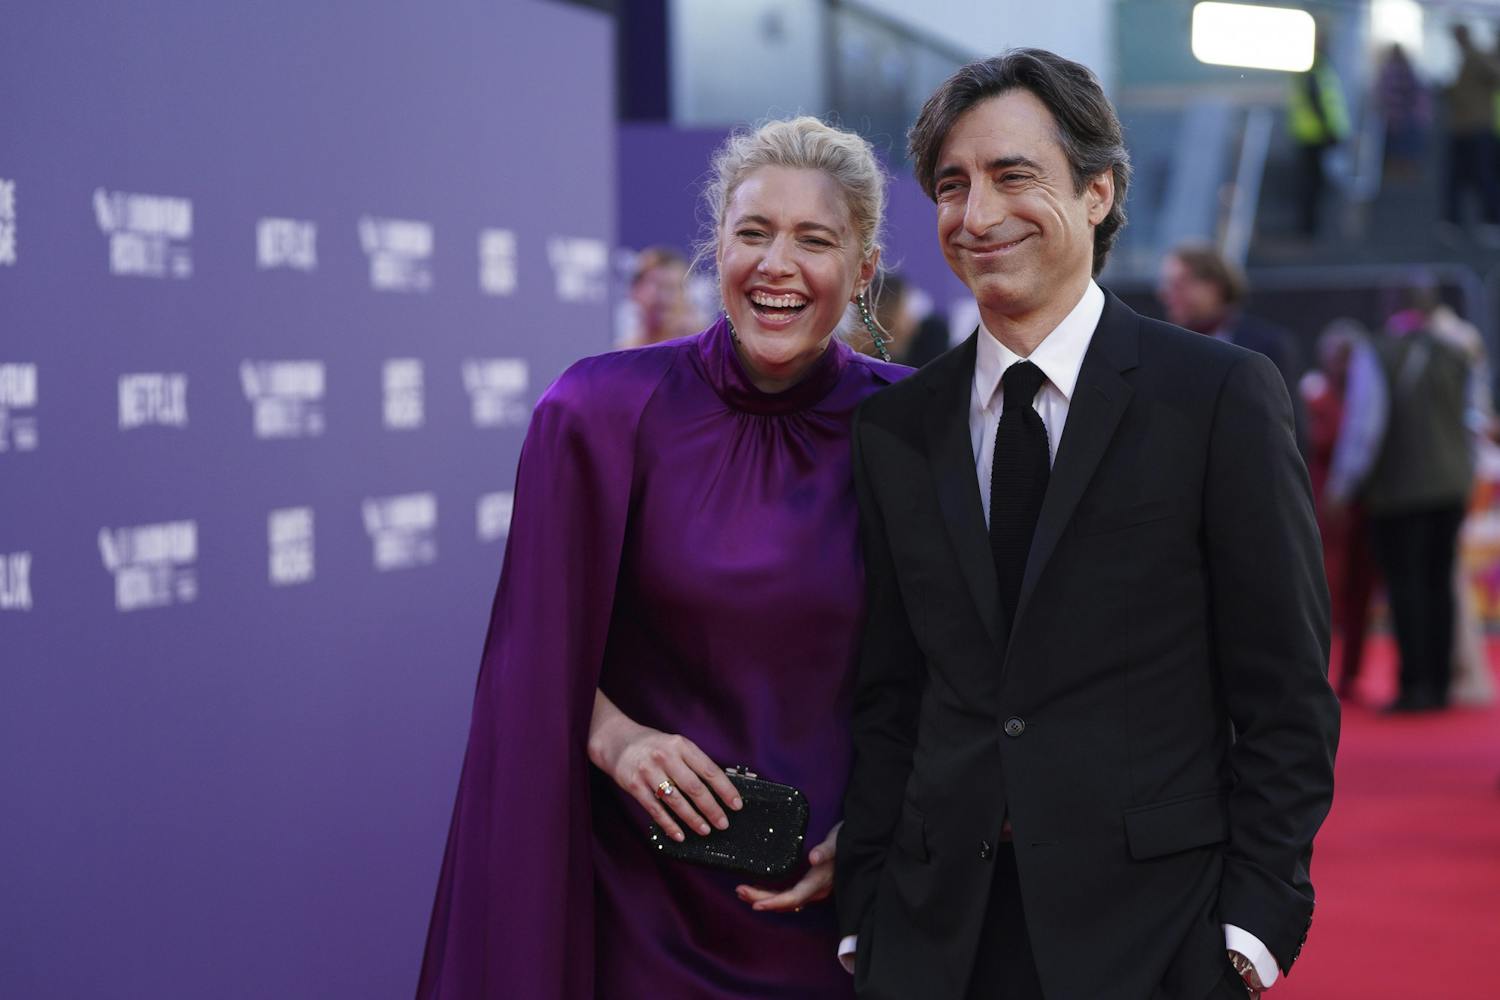 Greta Gerwig, left, and director Noah Baumbach pose for photographers upon arrival for the premiere of the film &#x27;White Noise&#x27; during the 2022 London Film Festival in London, Thursday, Oct. 6, 2022.